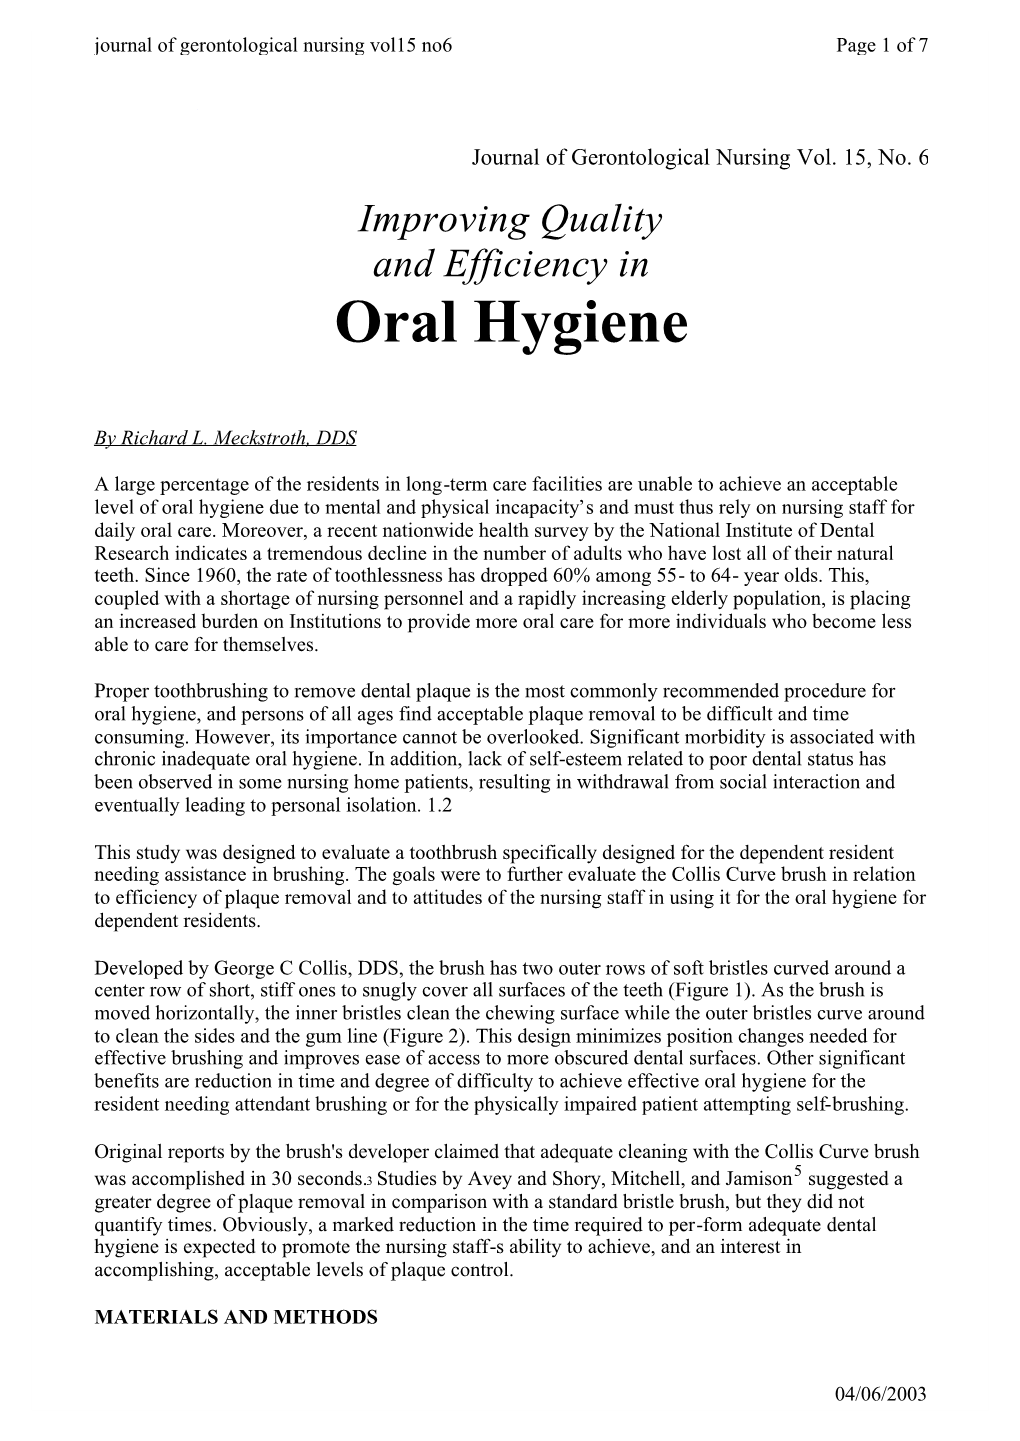 Improving Quality and Efficiency in Oral Hygiene